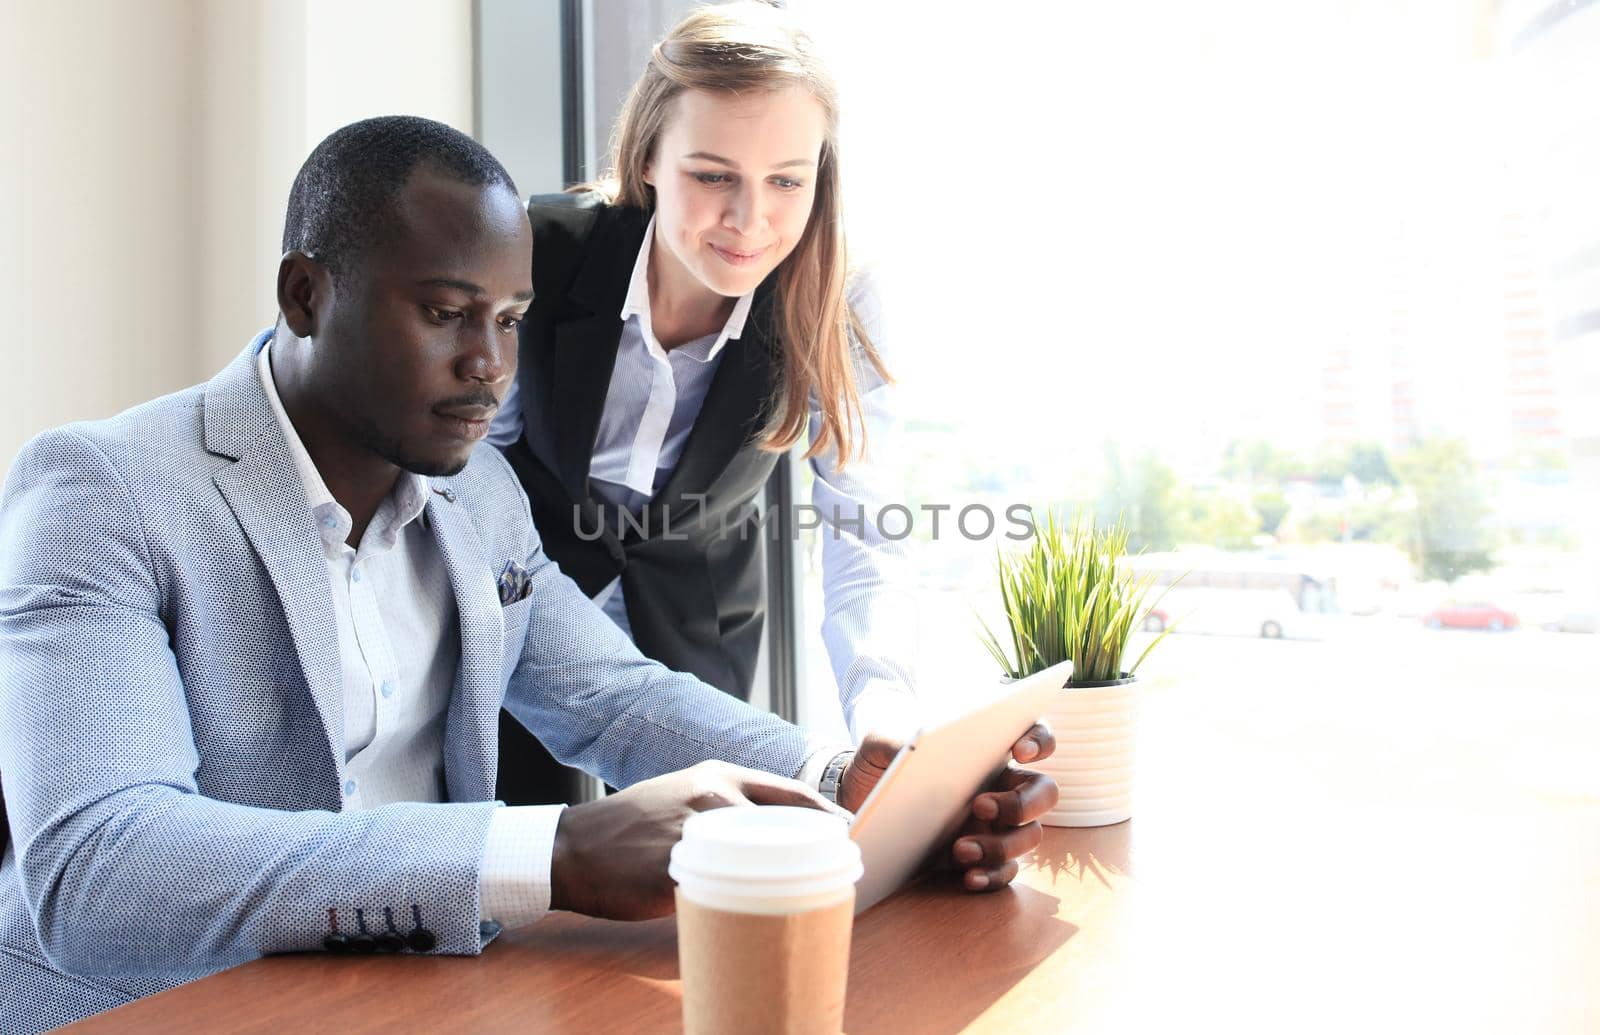 Image of two young business partners discussing plans or ideas at meeting